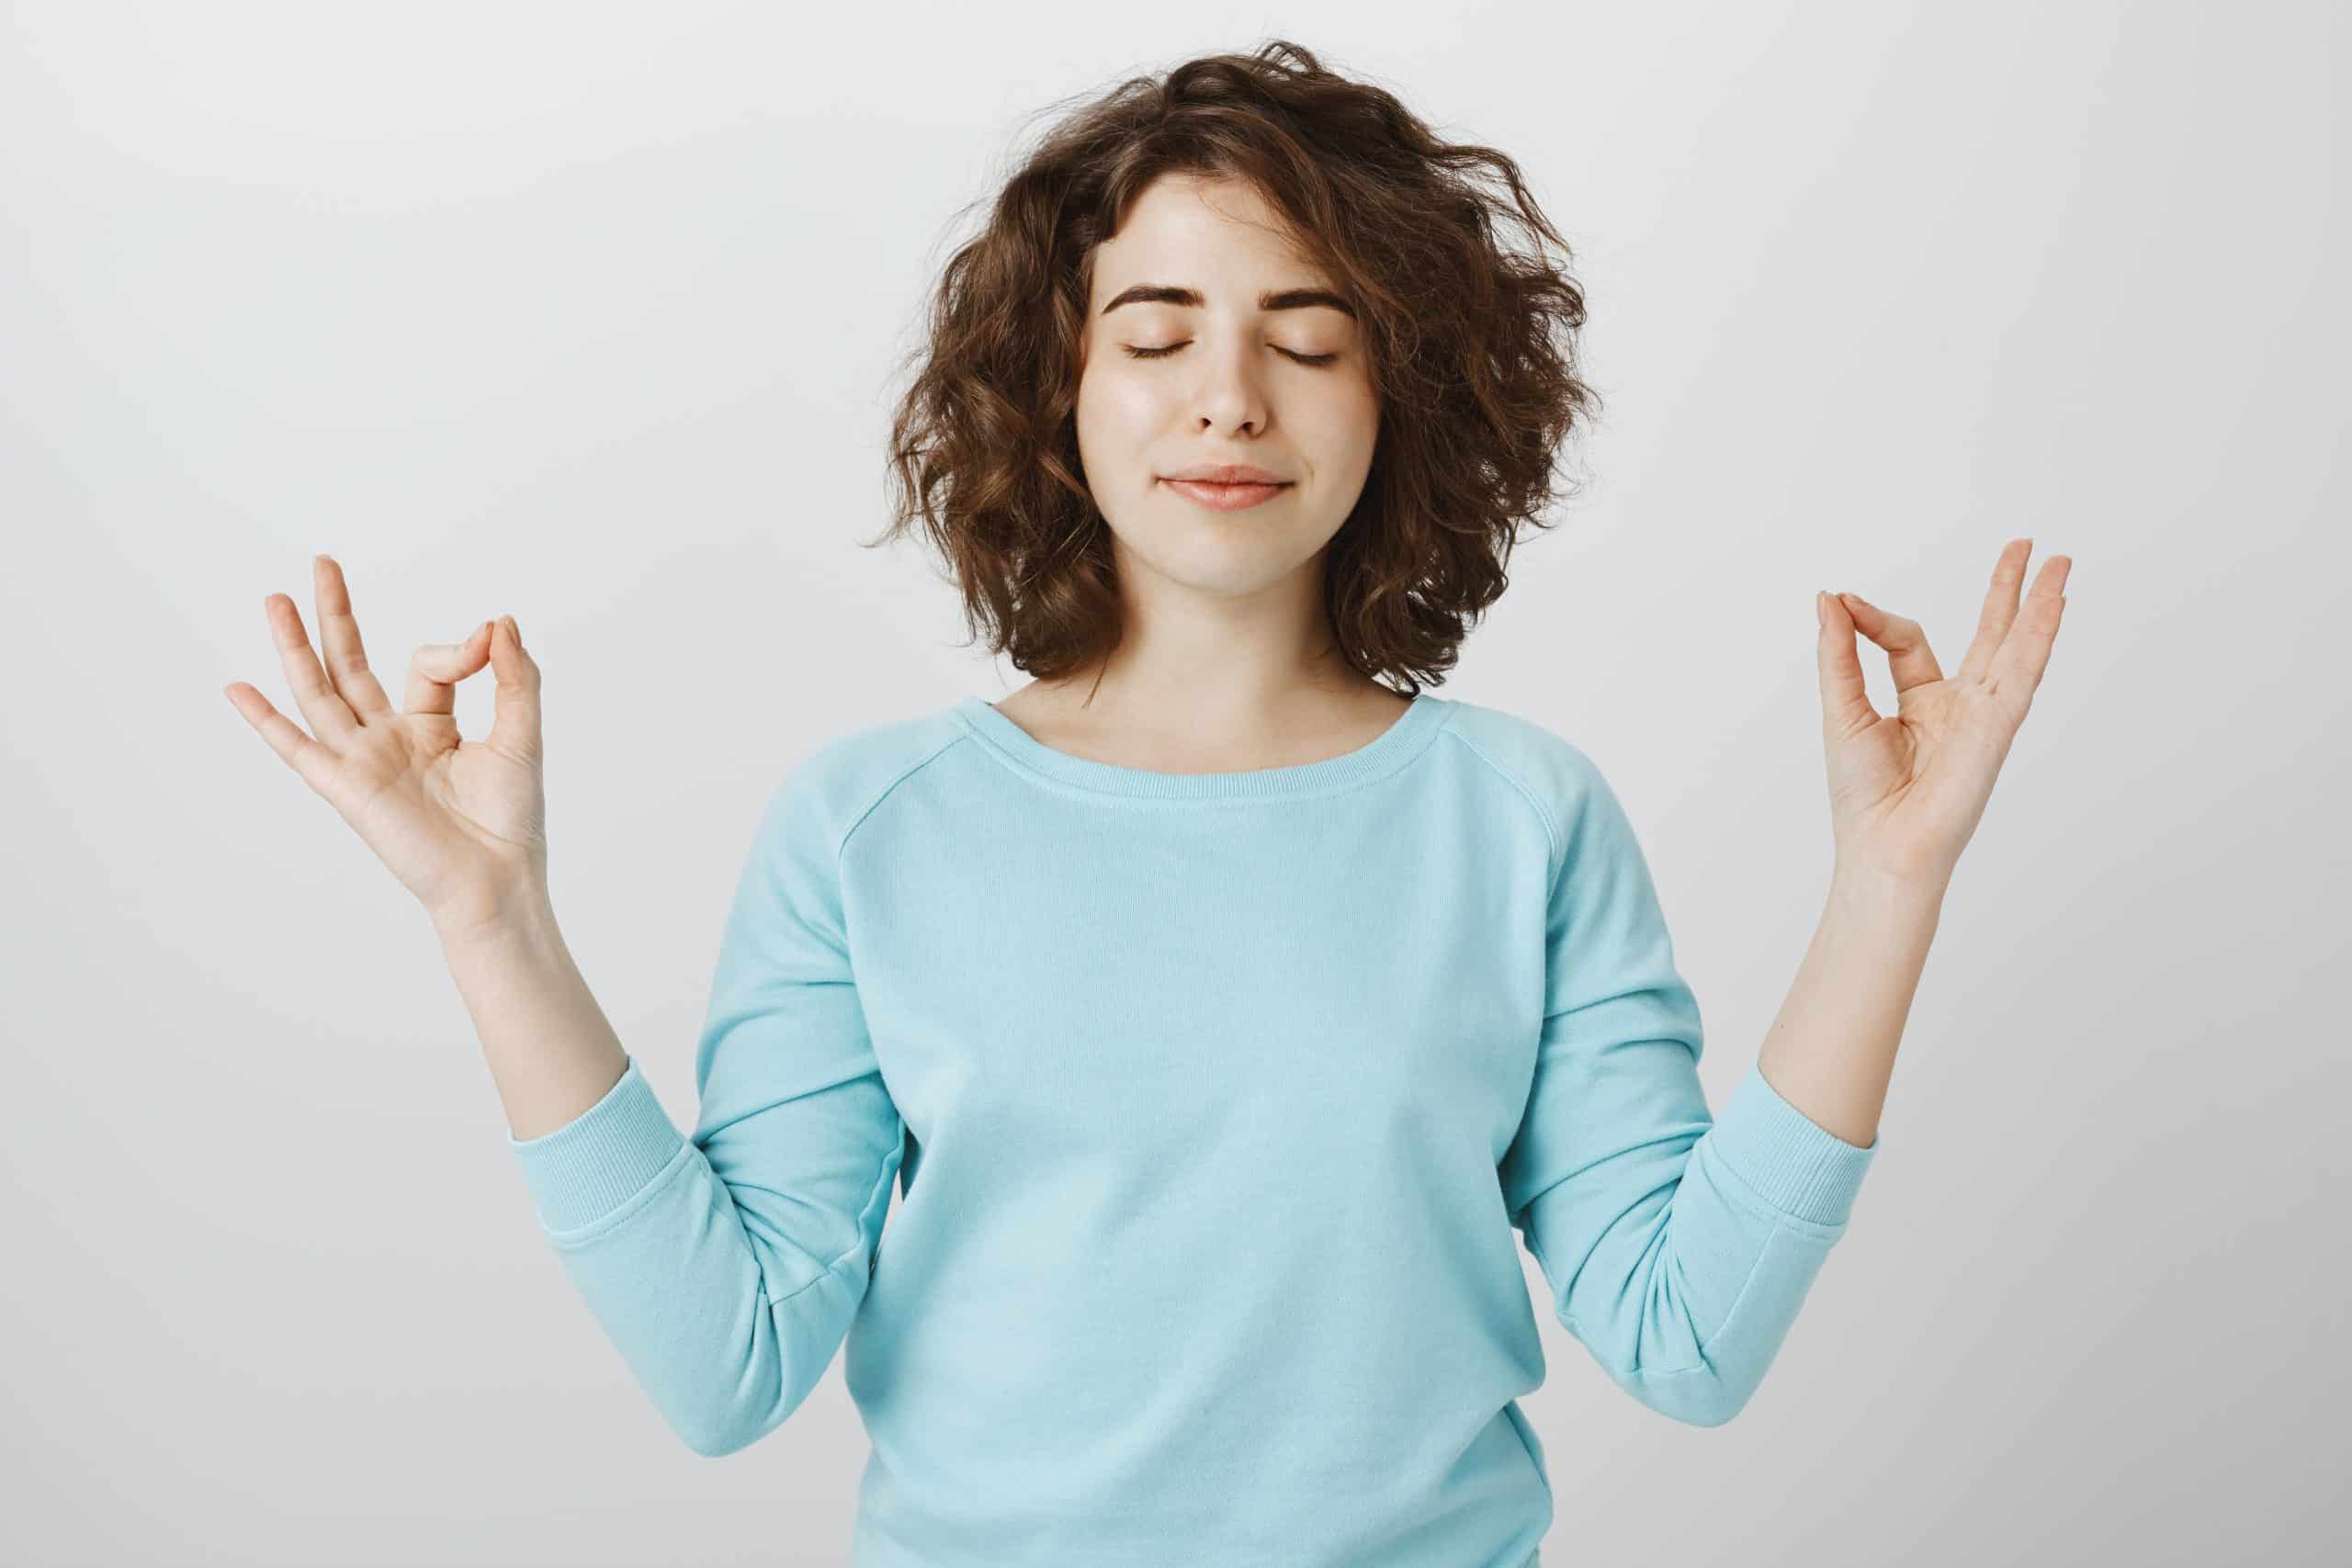 A woman looking peaceful, holding the mediation pose with eyes closed to indicate mental resilience.